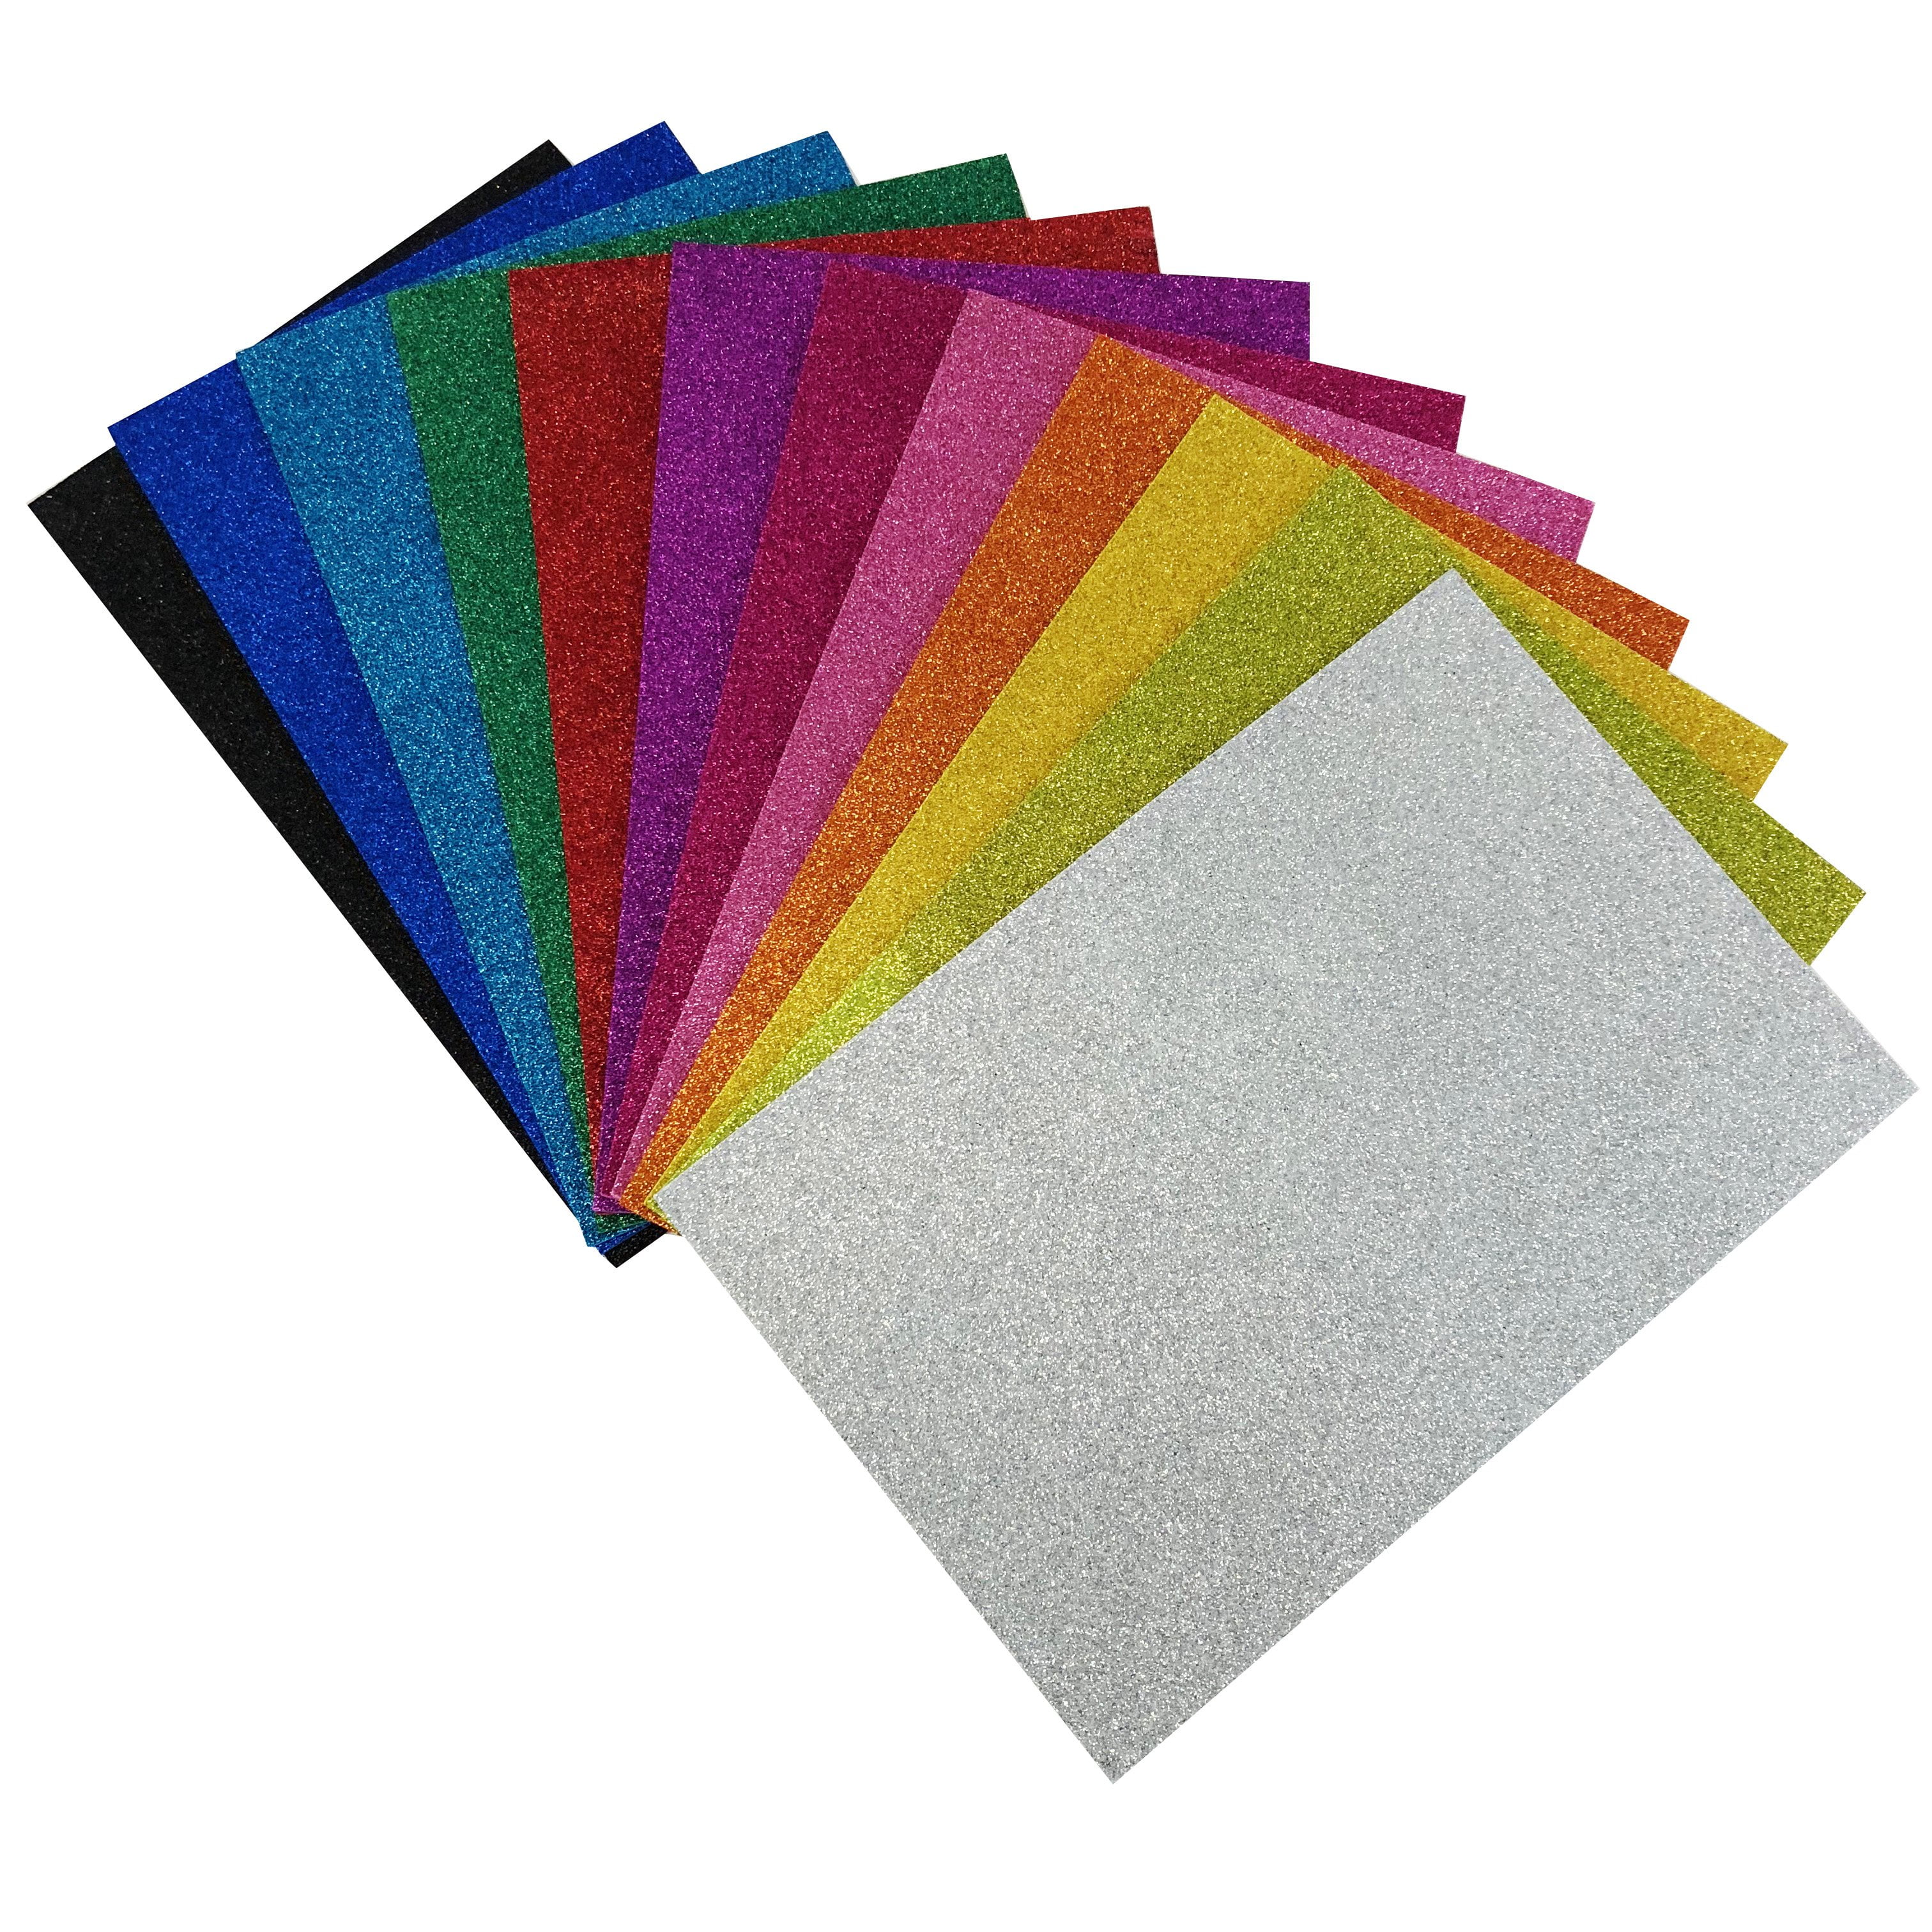 SELF-ADHESIVE FOAM SHEETS ASSORTED COLOURS, 9X 12, 10 PACK - DBG37521